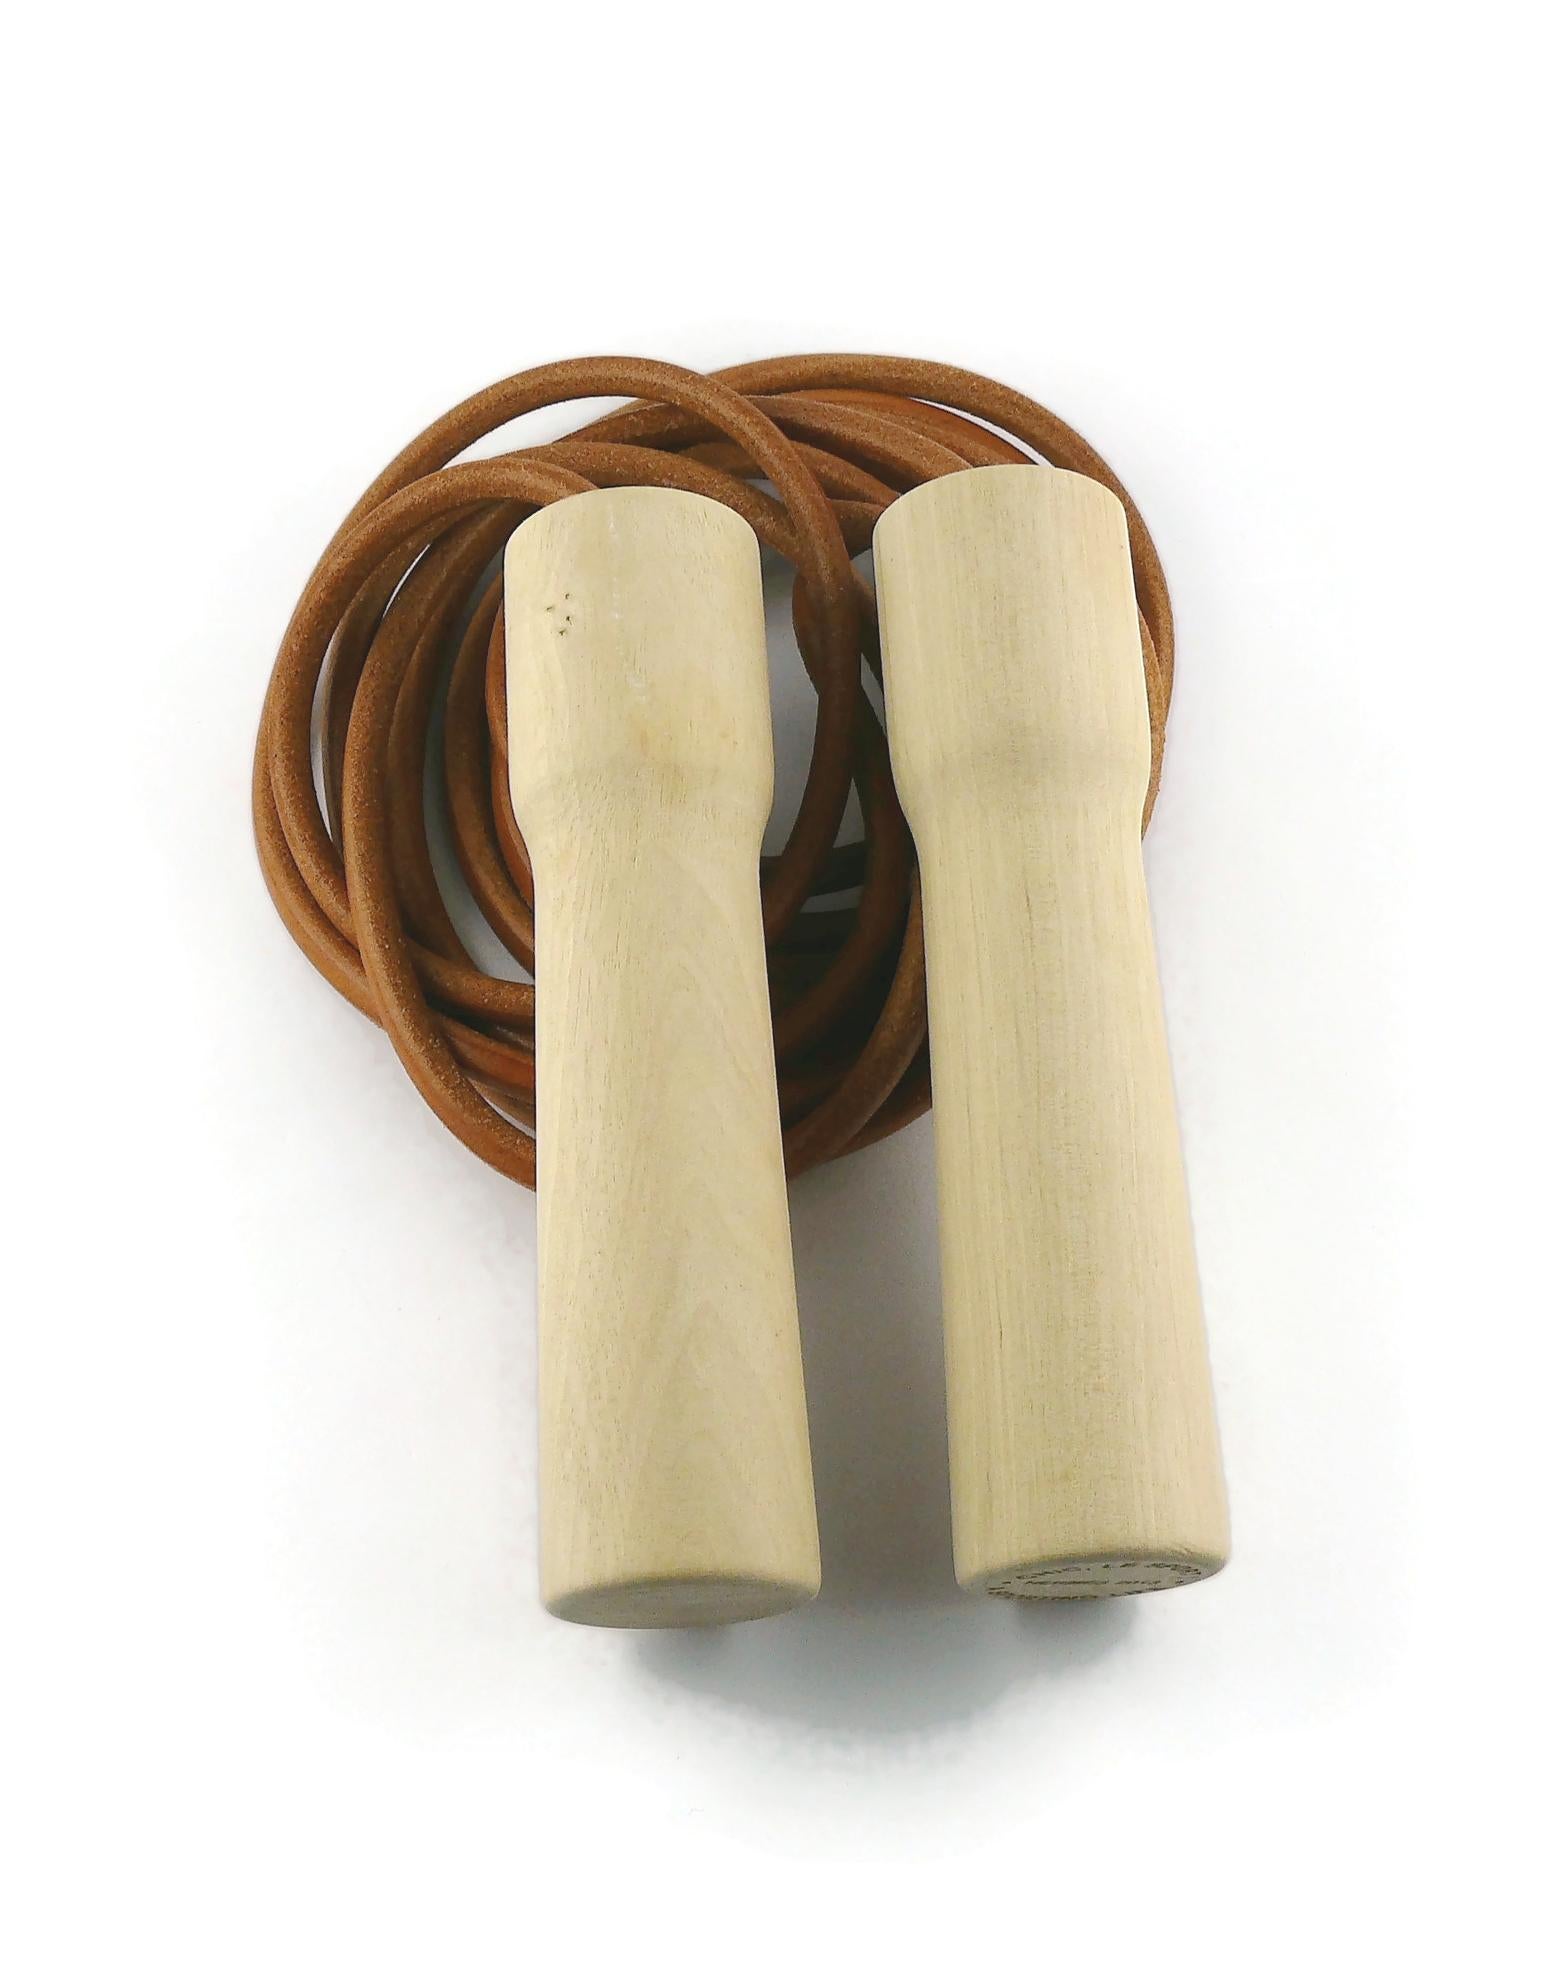 HERMES Paris wood handle and leather jumping rope.

Marked HERMES 2013 Made in France.
Embossed Chic, le sport ! A sporting life.

Indicative measurements : from each side of the handles approx. 300 cm (118.11 inches).

Comes with  the original dust